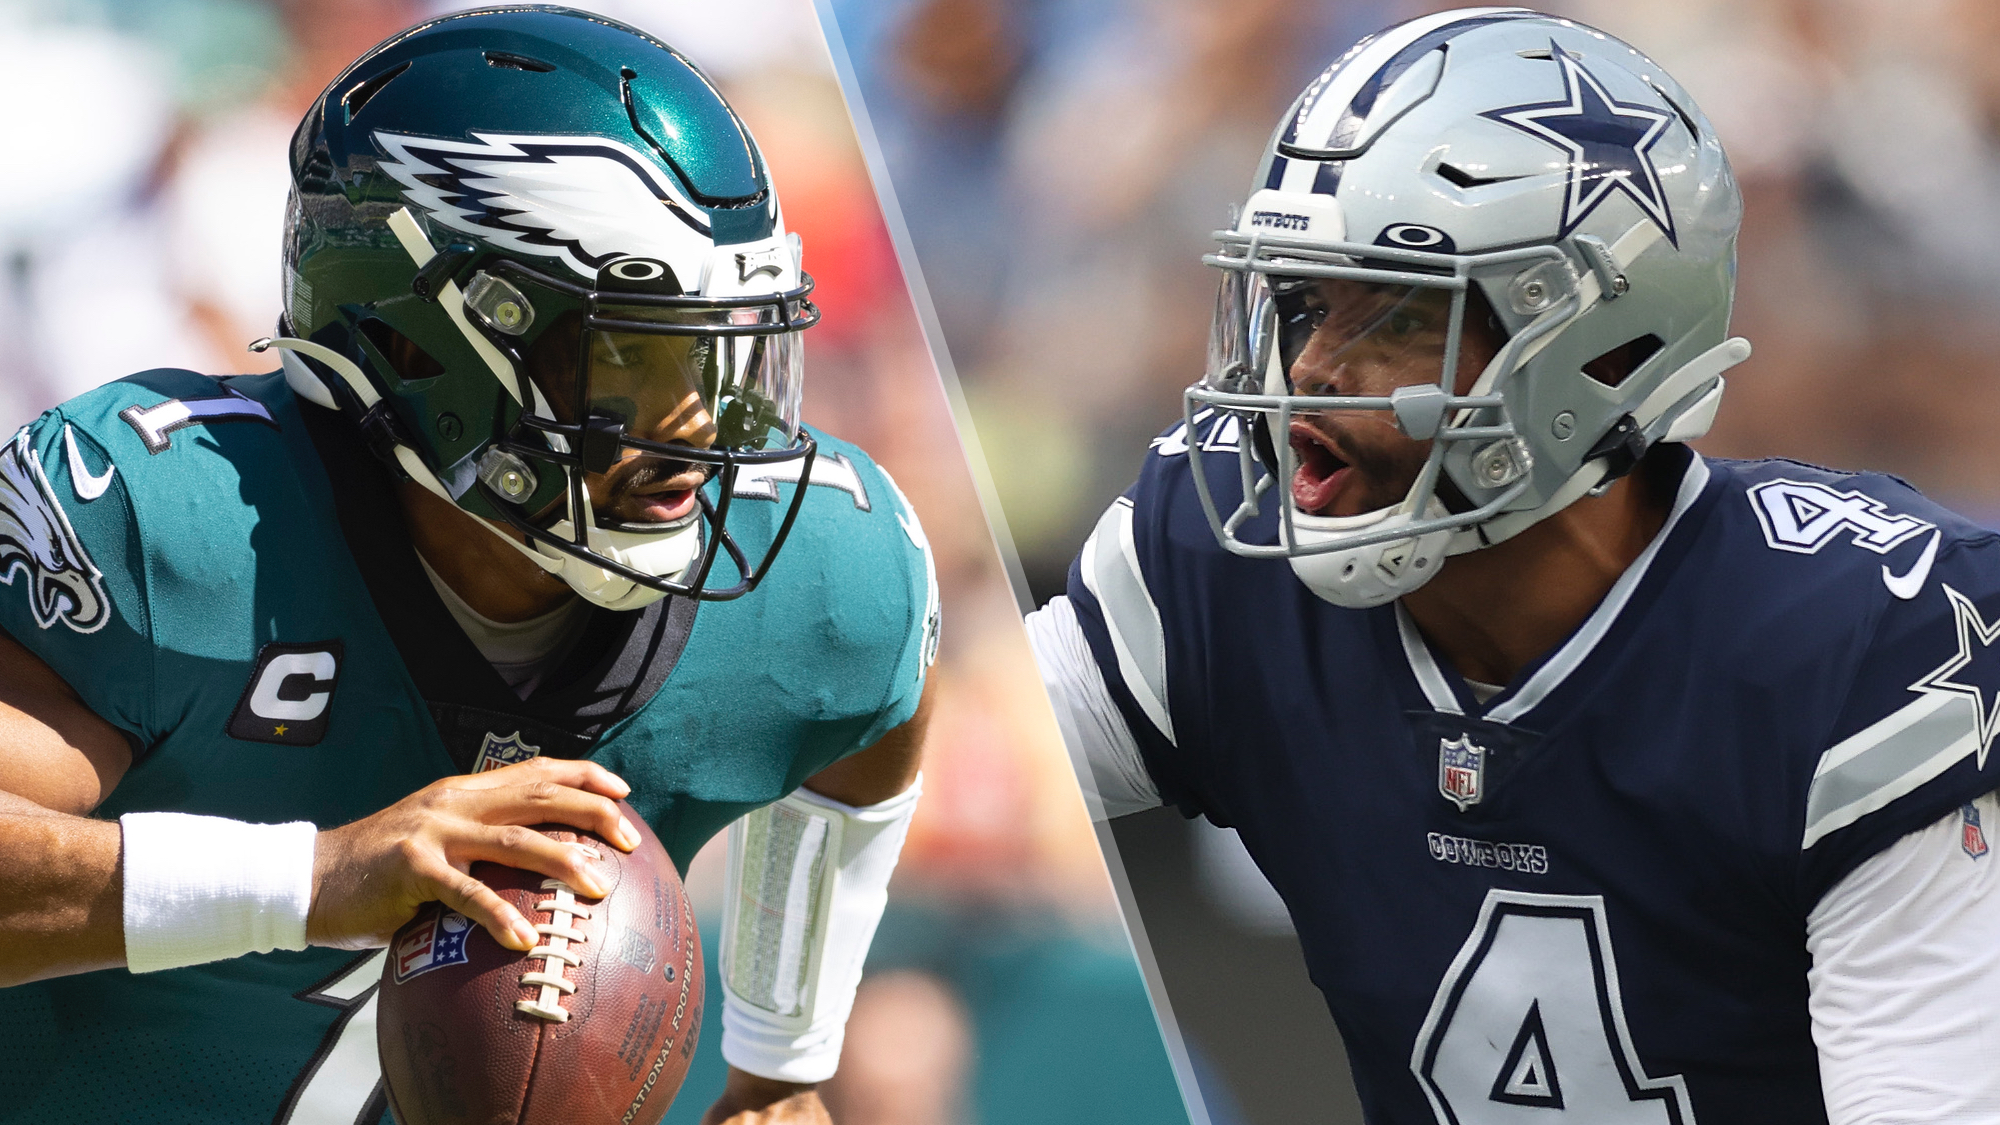 Eagles vs Cowboys live stream: How to watch Monday Night Football